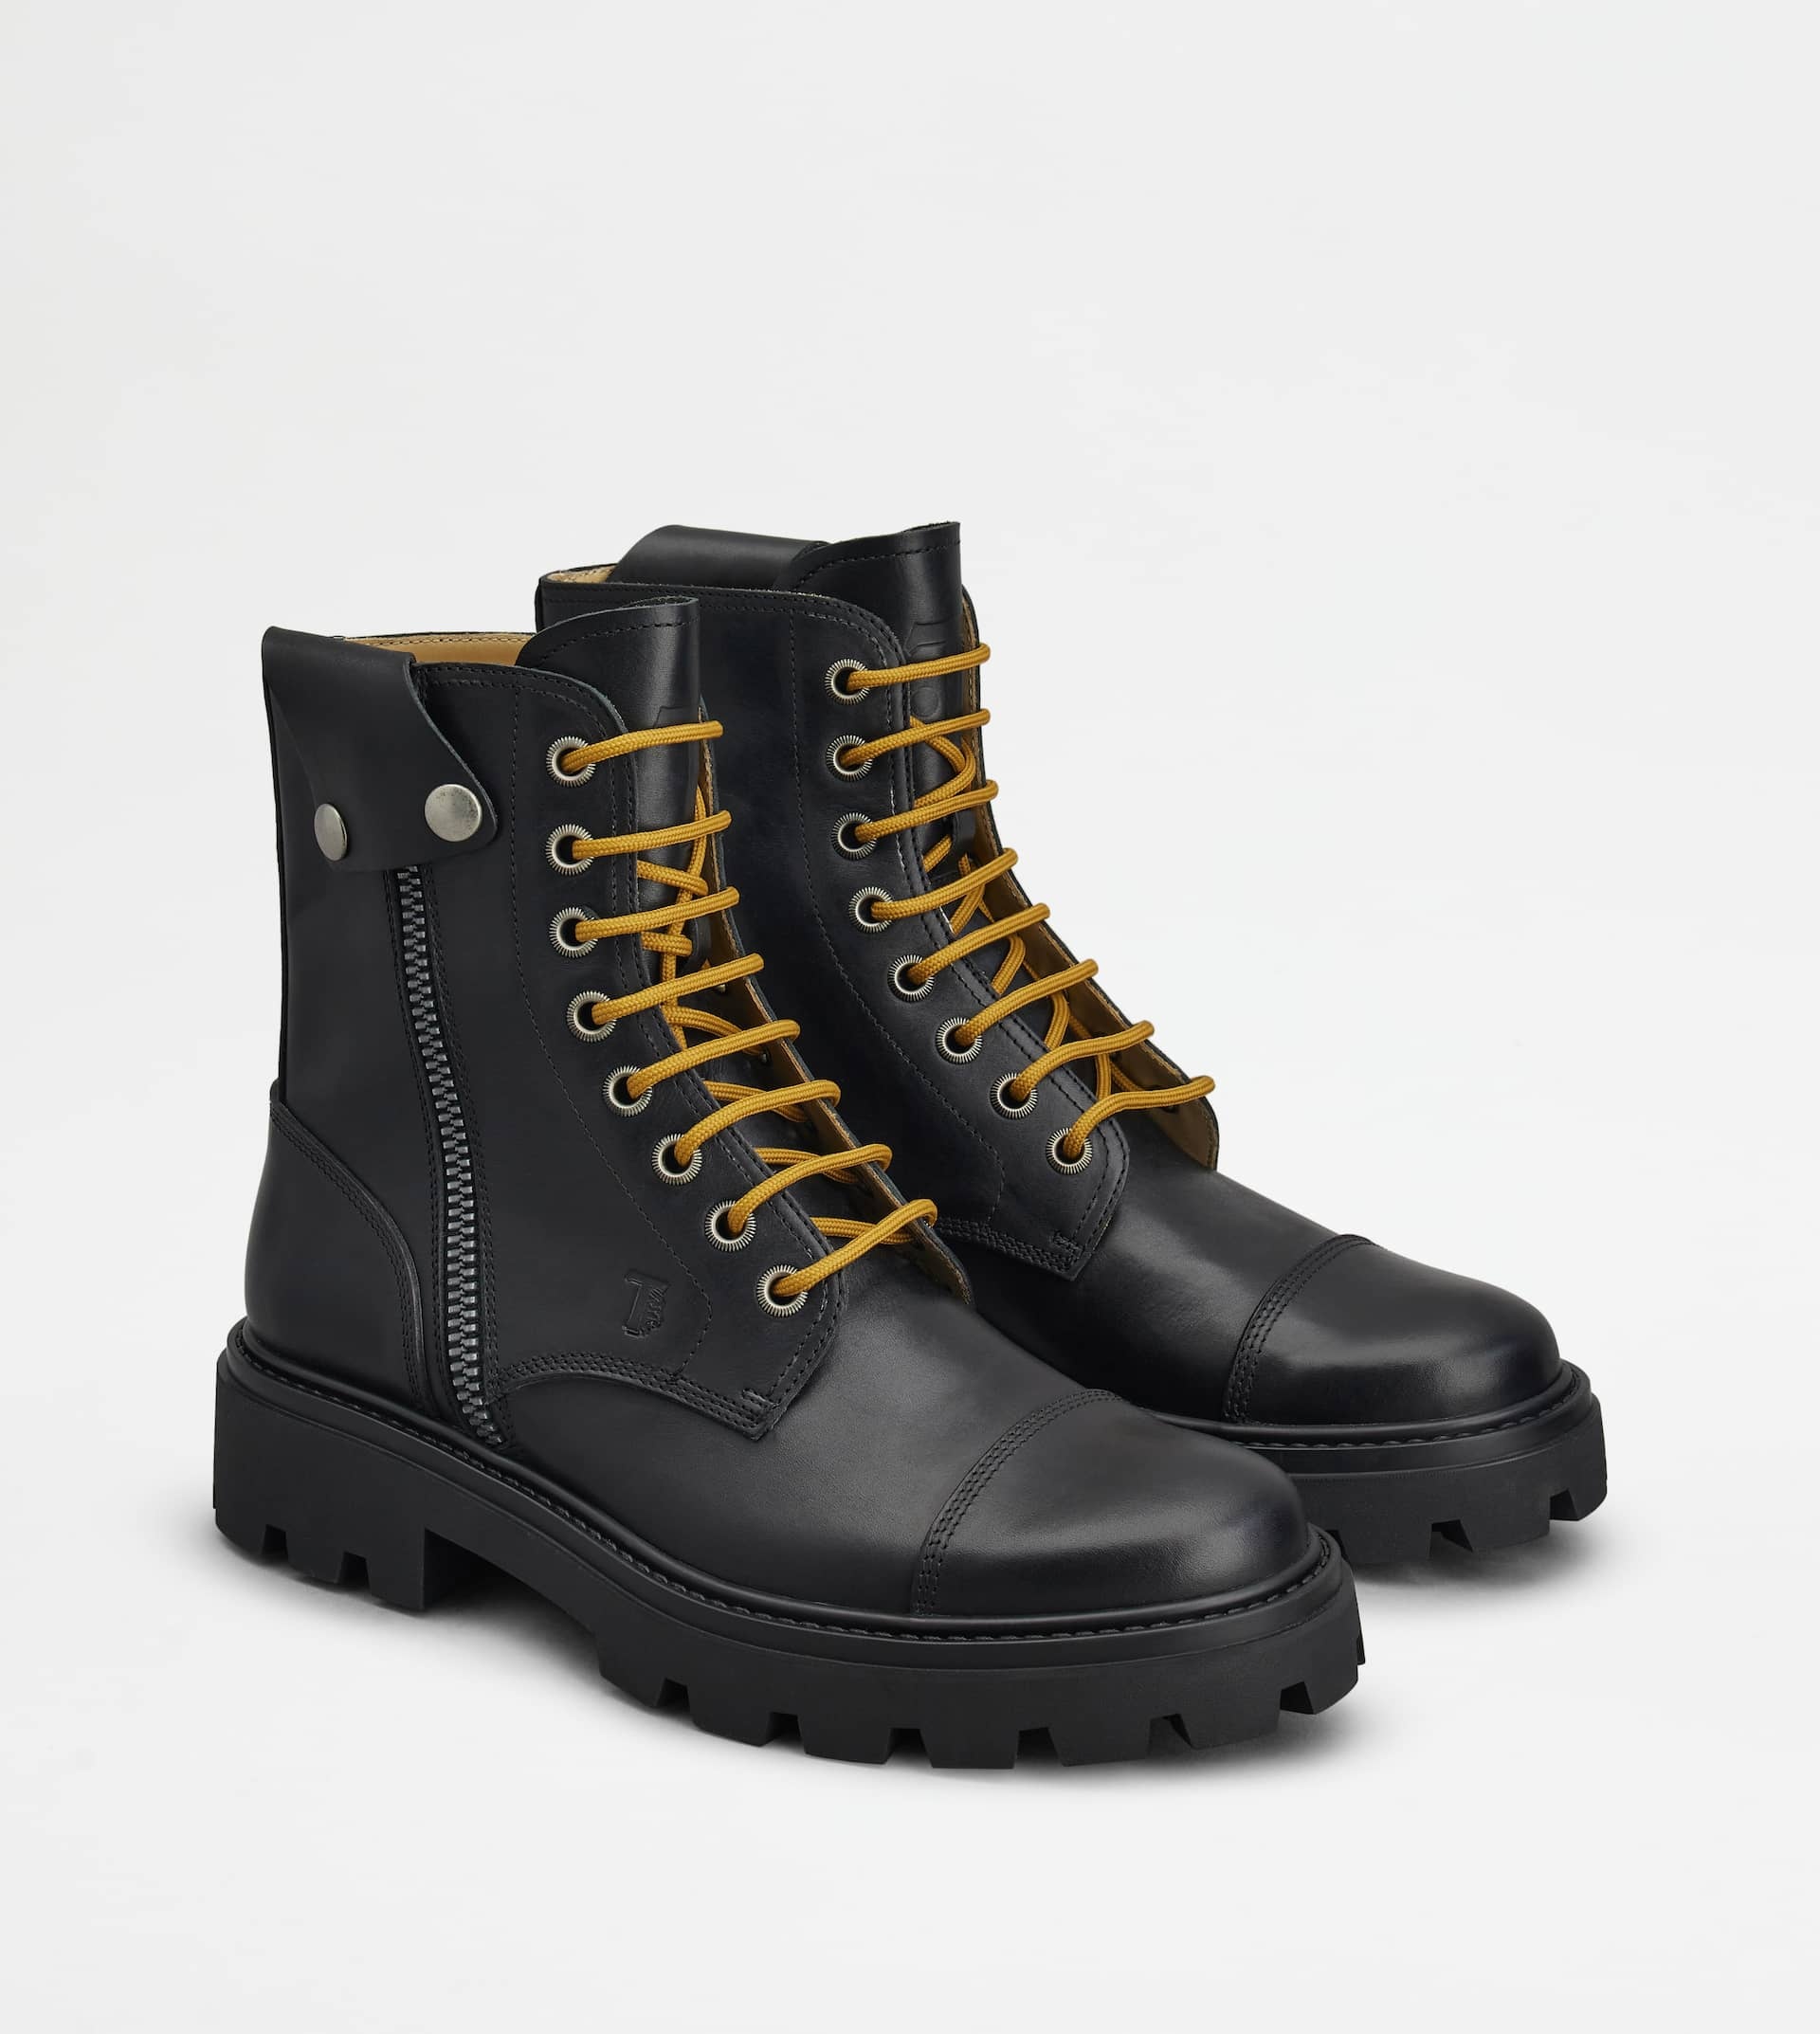 TOD'S COMBAT BOOTS IN LEATHER - BLACK - 4